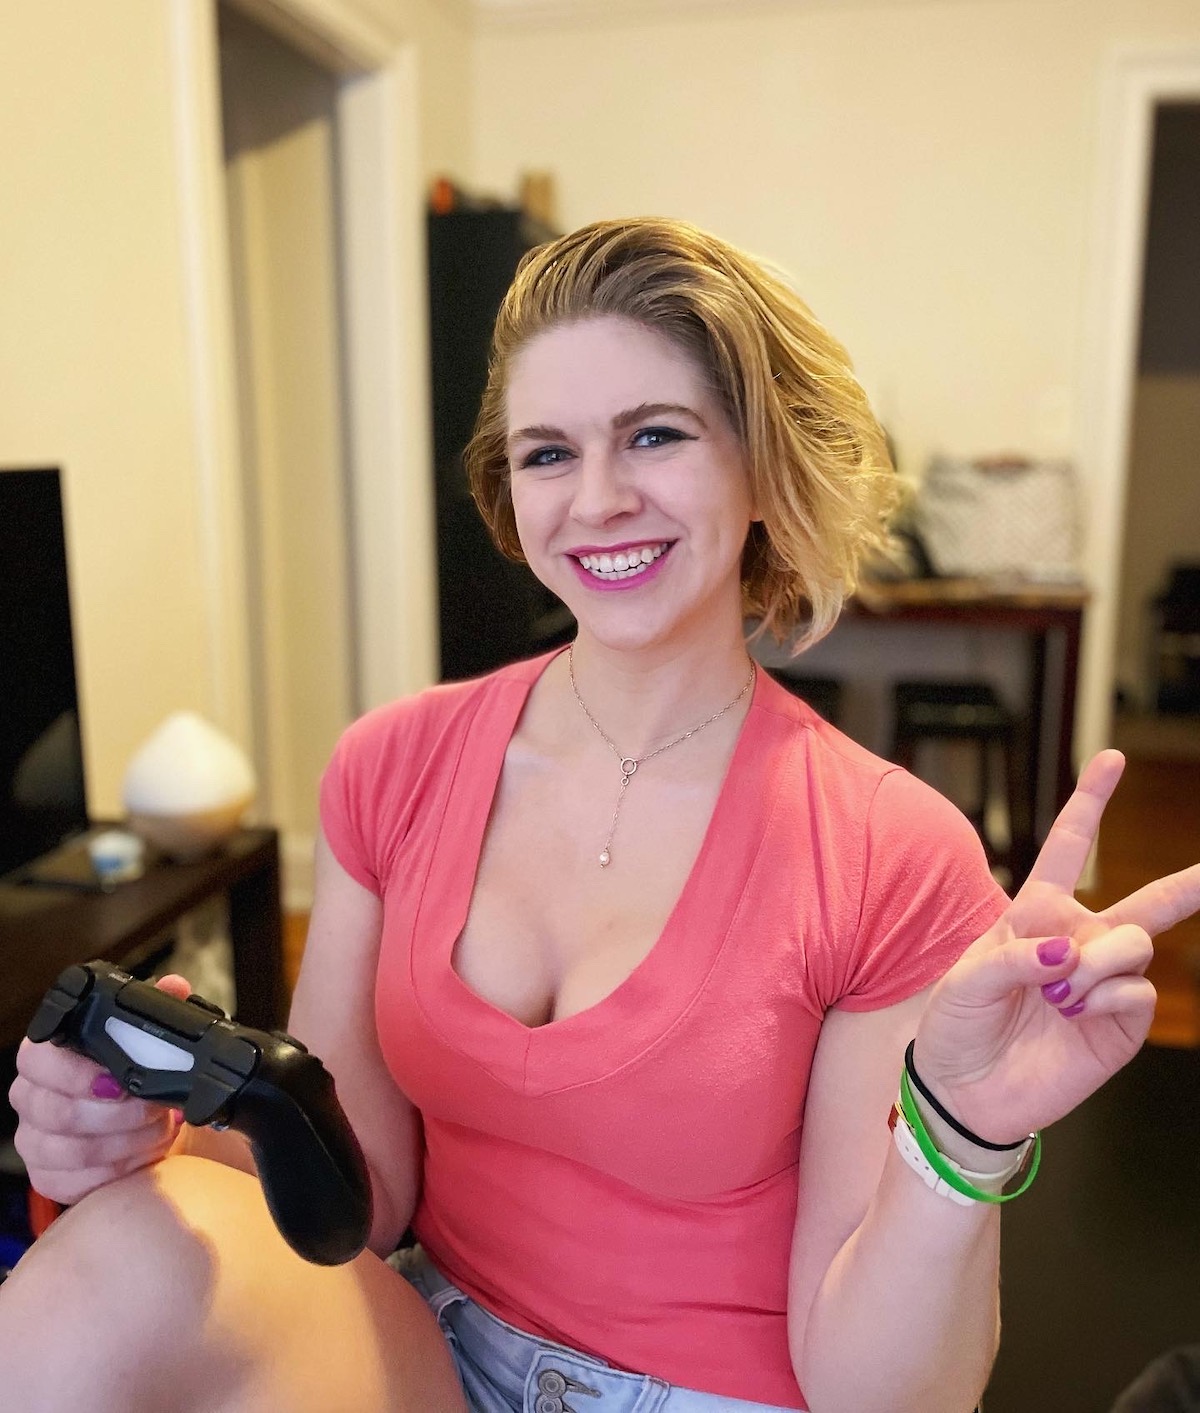 blonde girl with pink lipstick and a peach colored shirt holding a Playstation controller and smiling at camera while throwing the peace sign